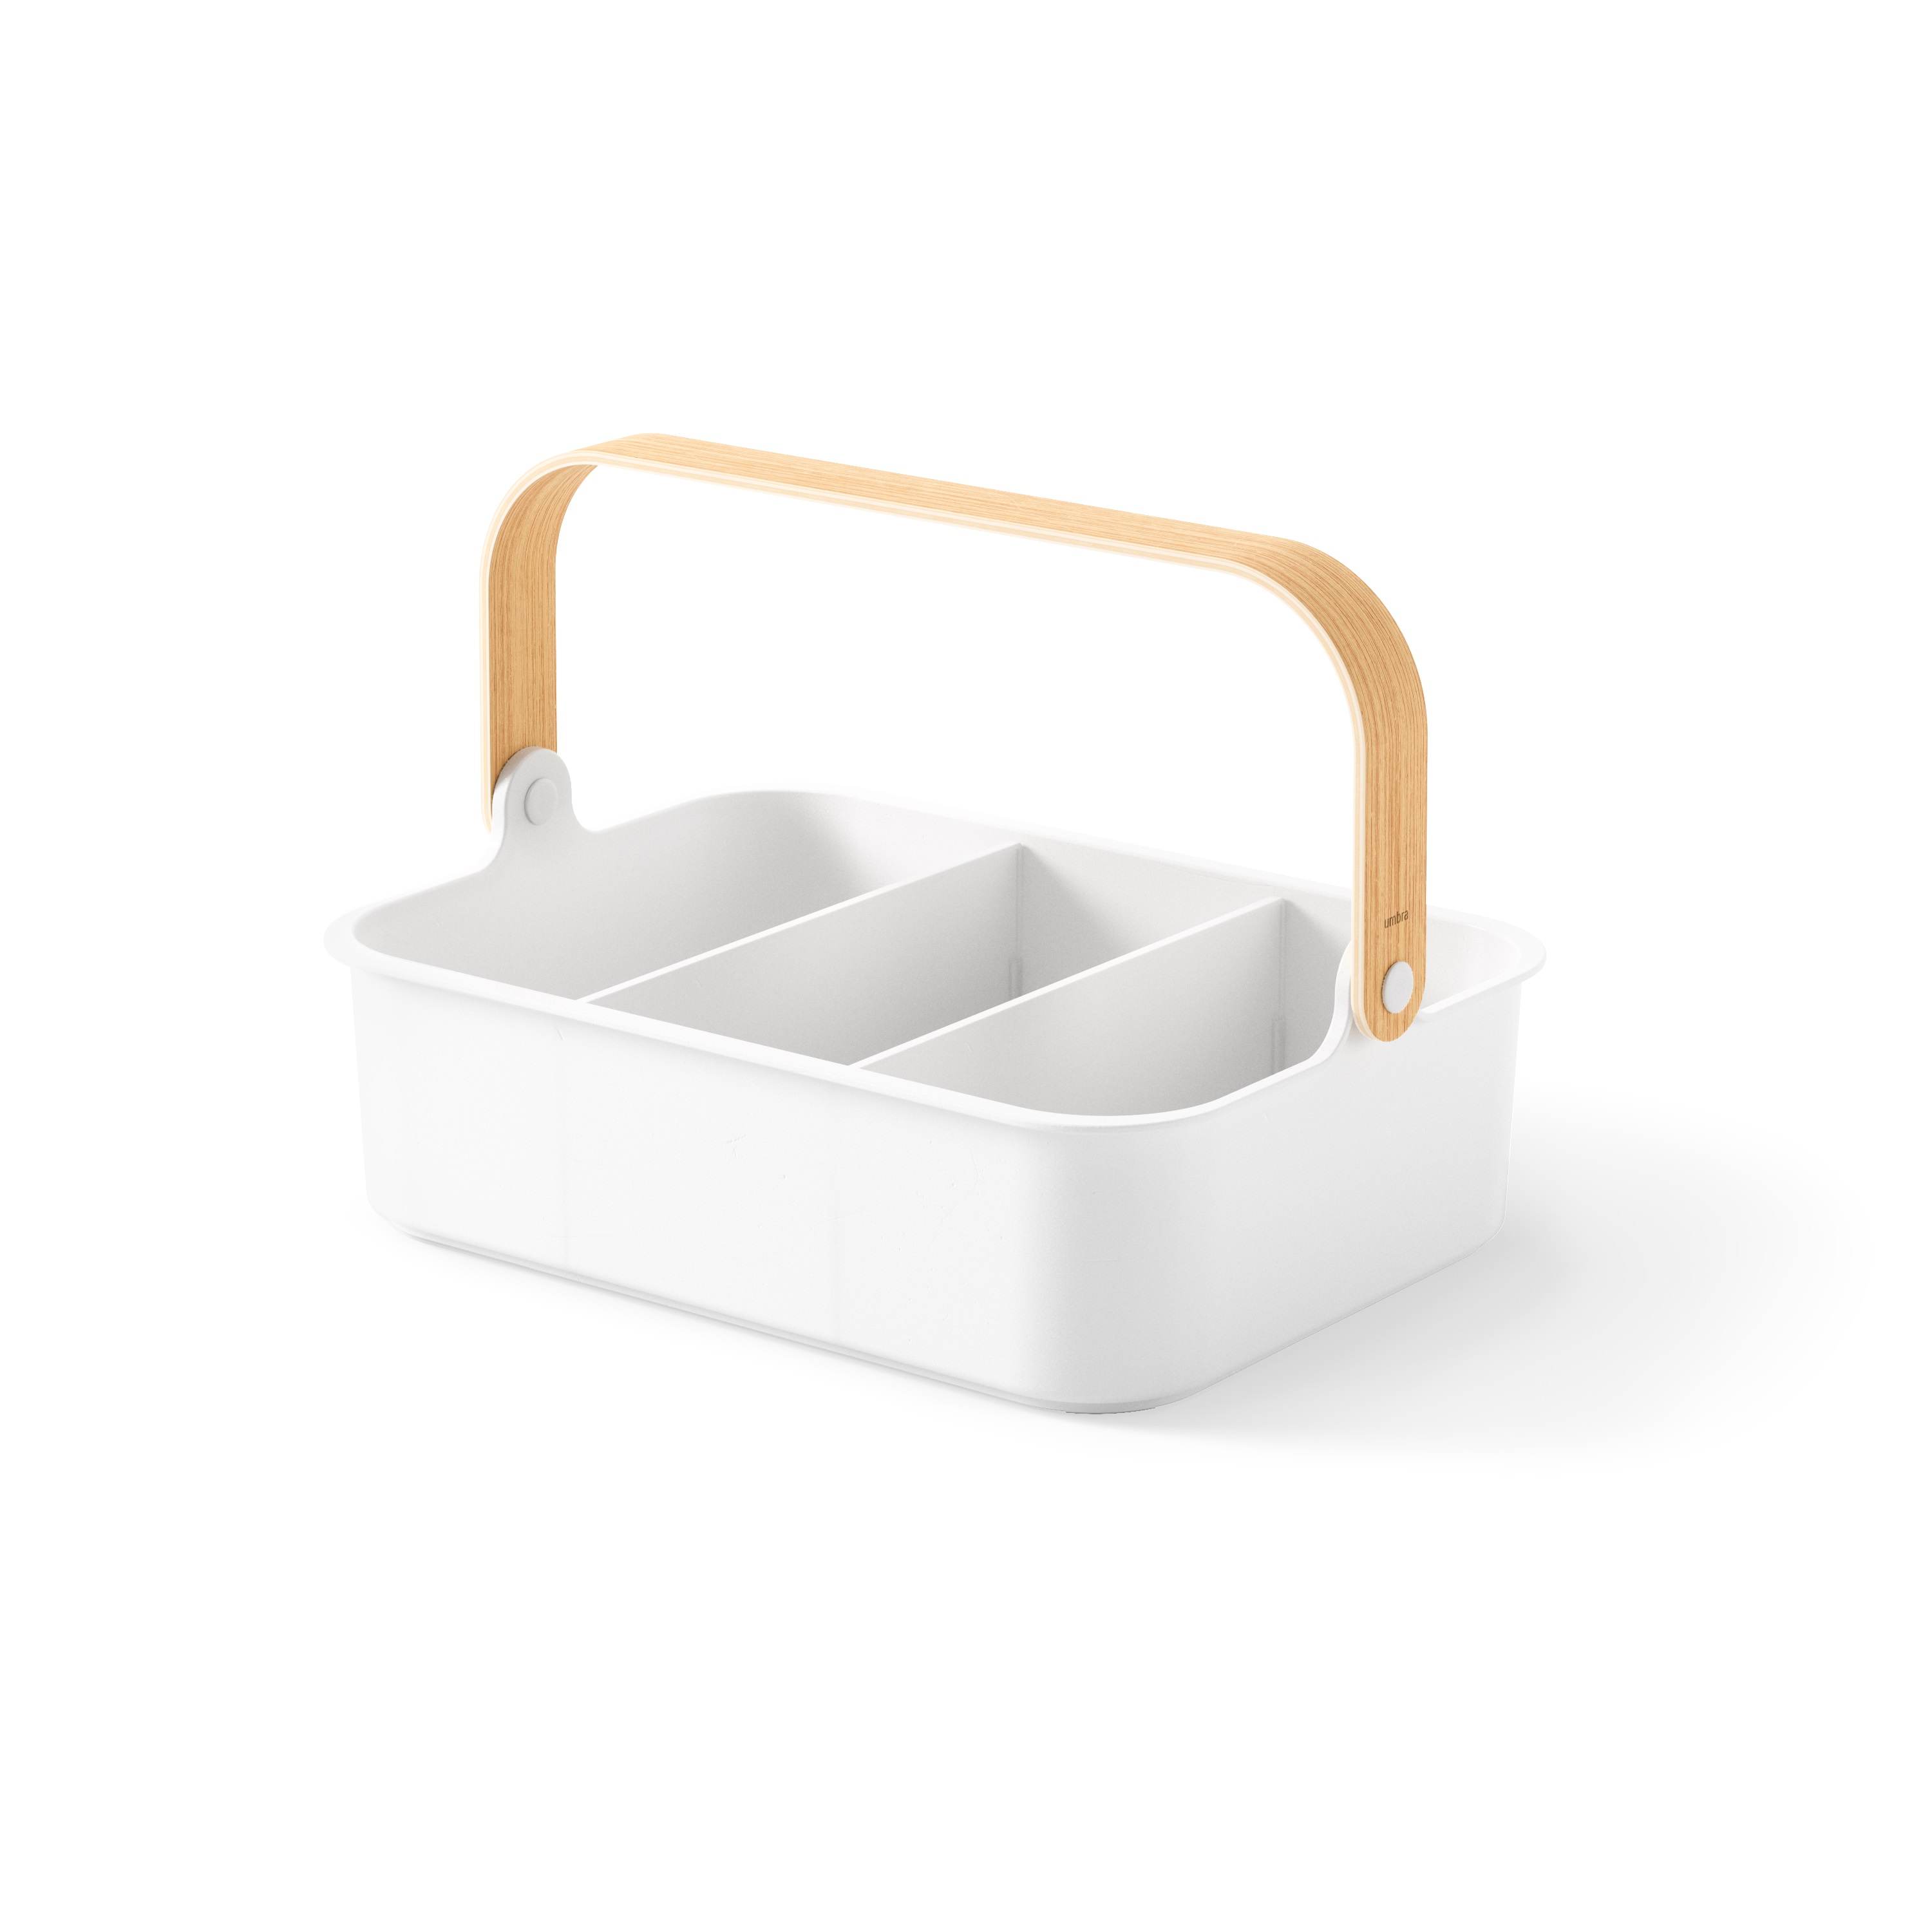 Umbra Bellwood Caddy White/Natural